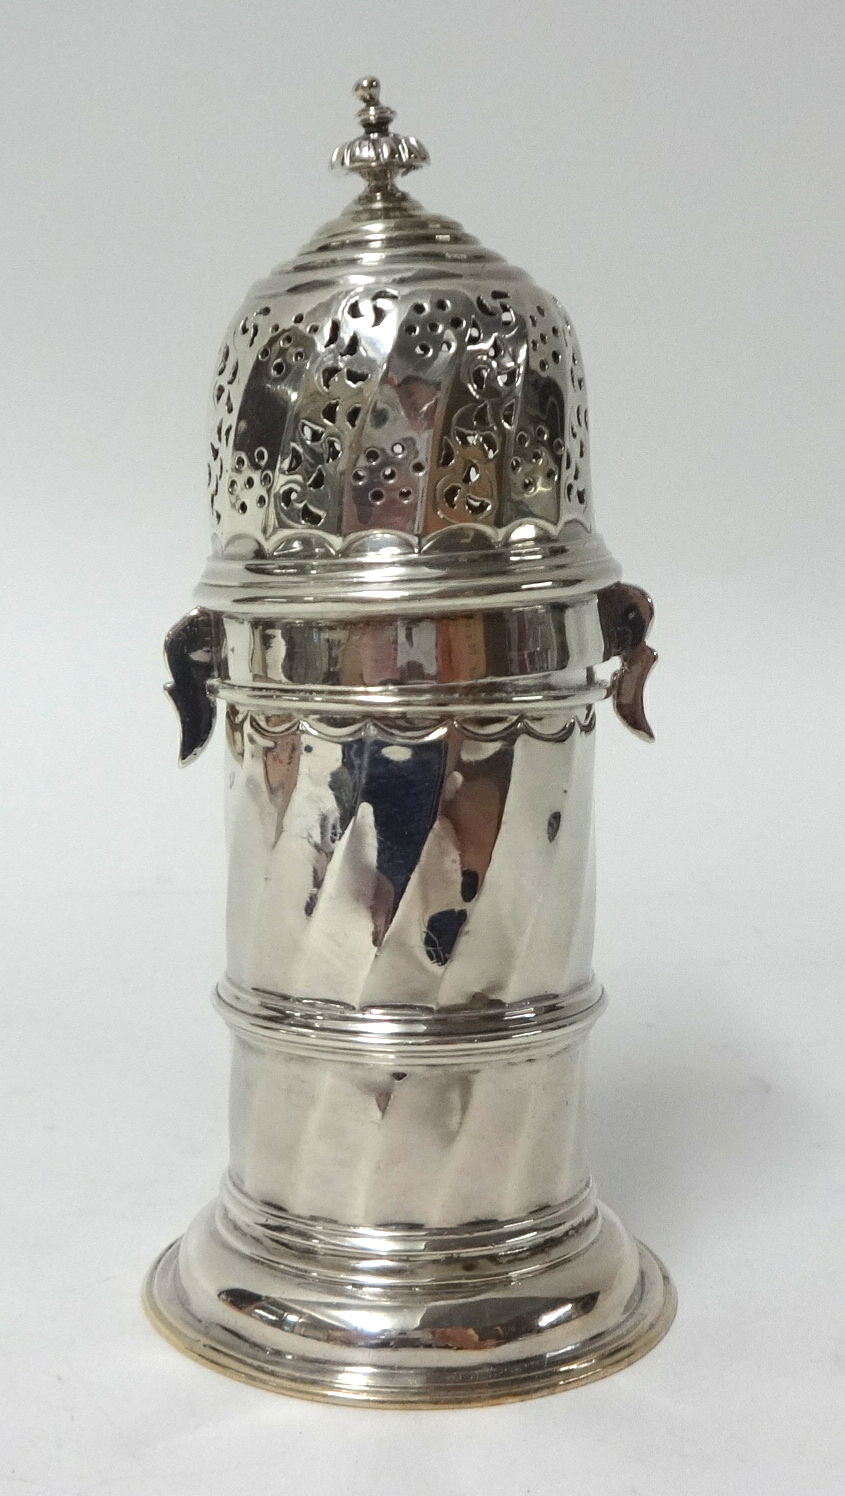 Silver Britannia lighthouse sugar caster possibly by Charles Stuart Harris with cylindrical body and